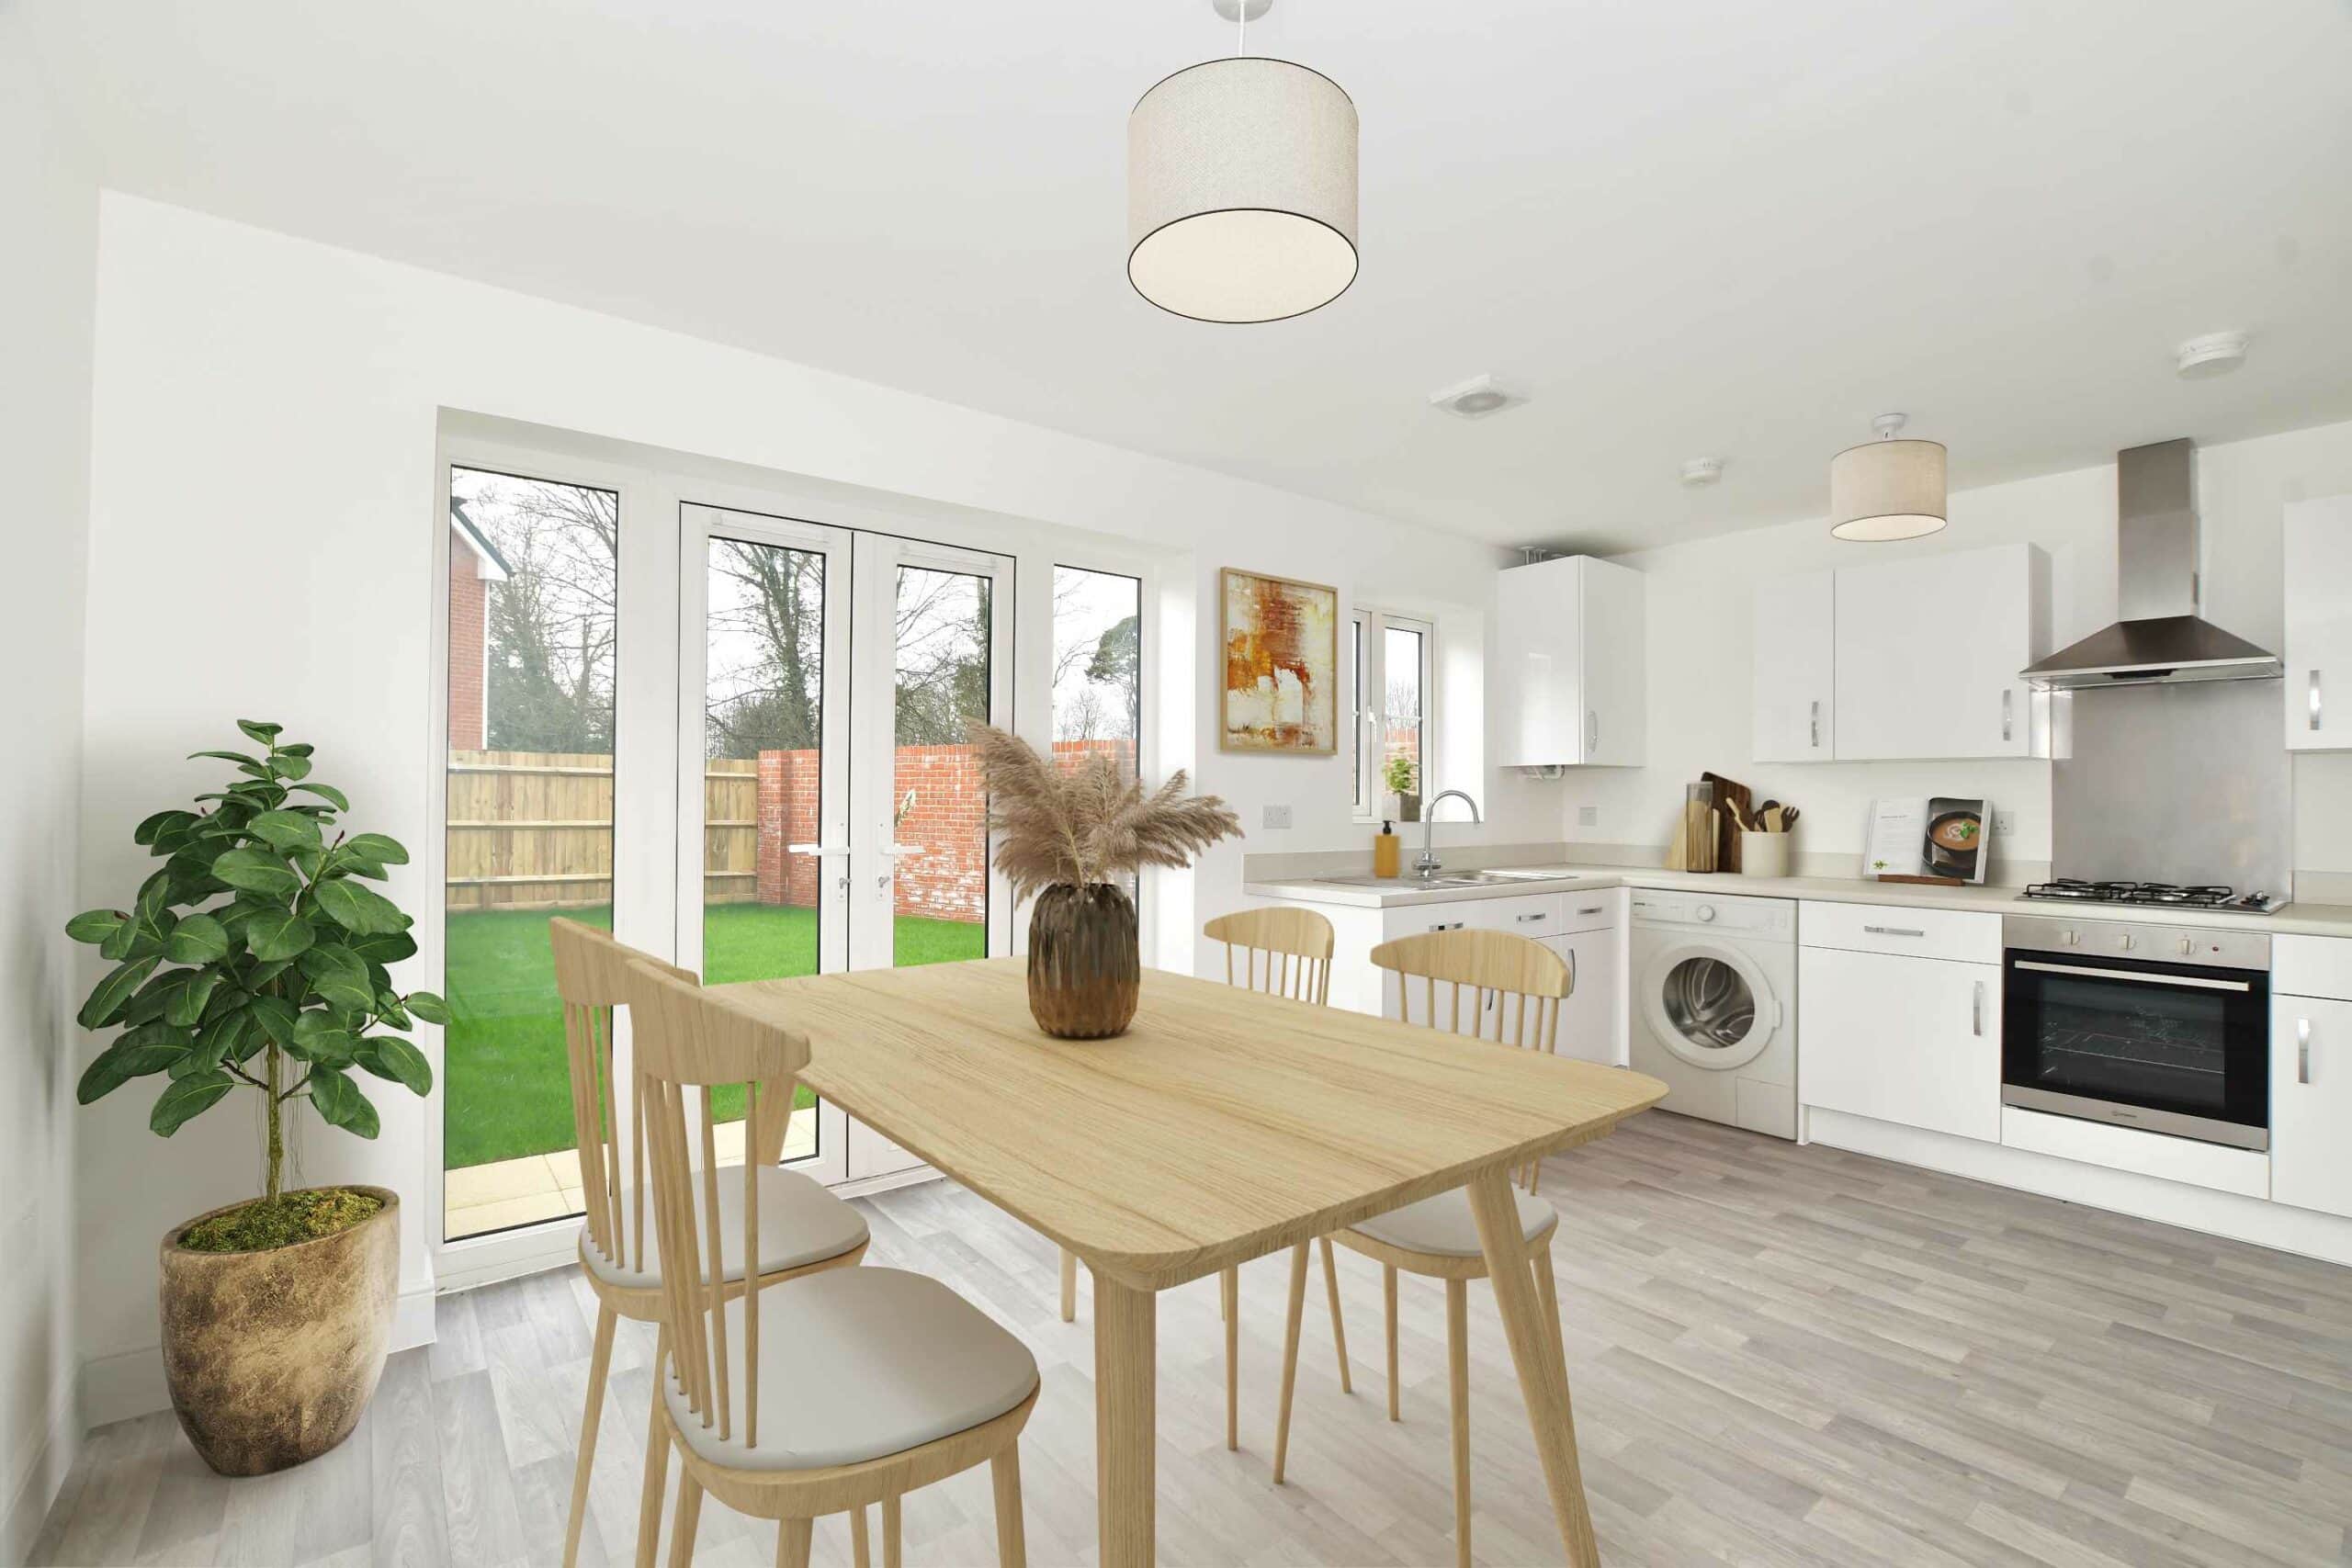 Image of Eastergate Park development from Sovereign - available to purchase through Shared Ownership on Share to Buy!